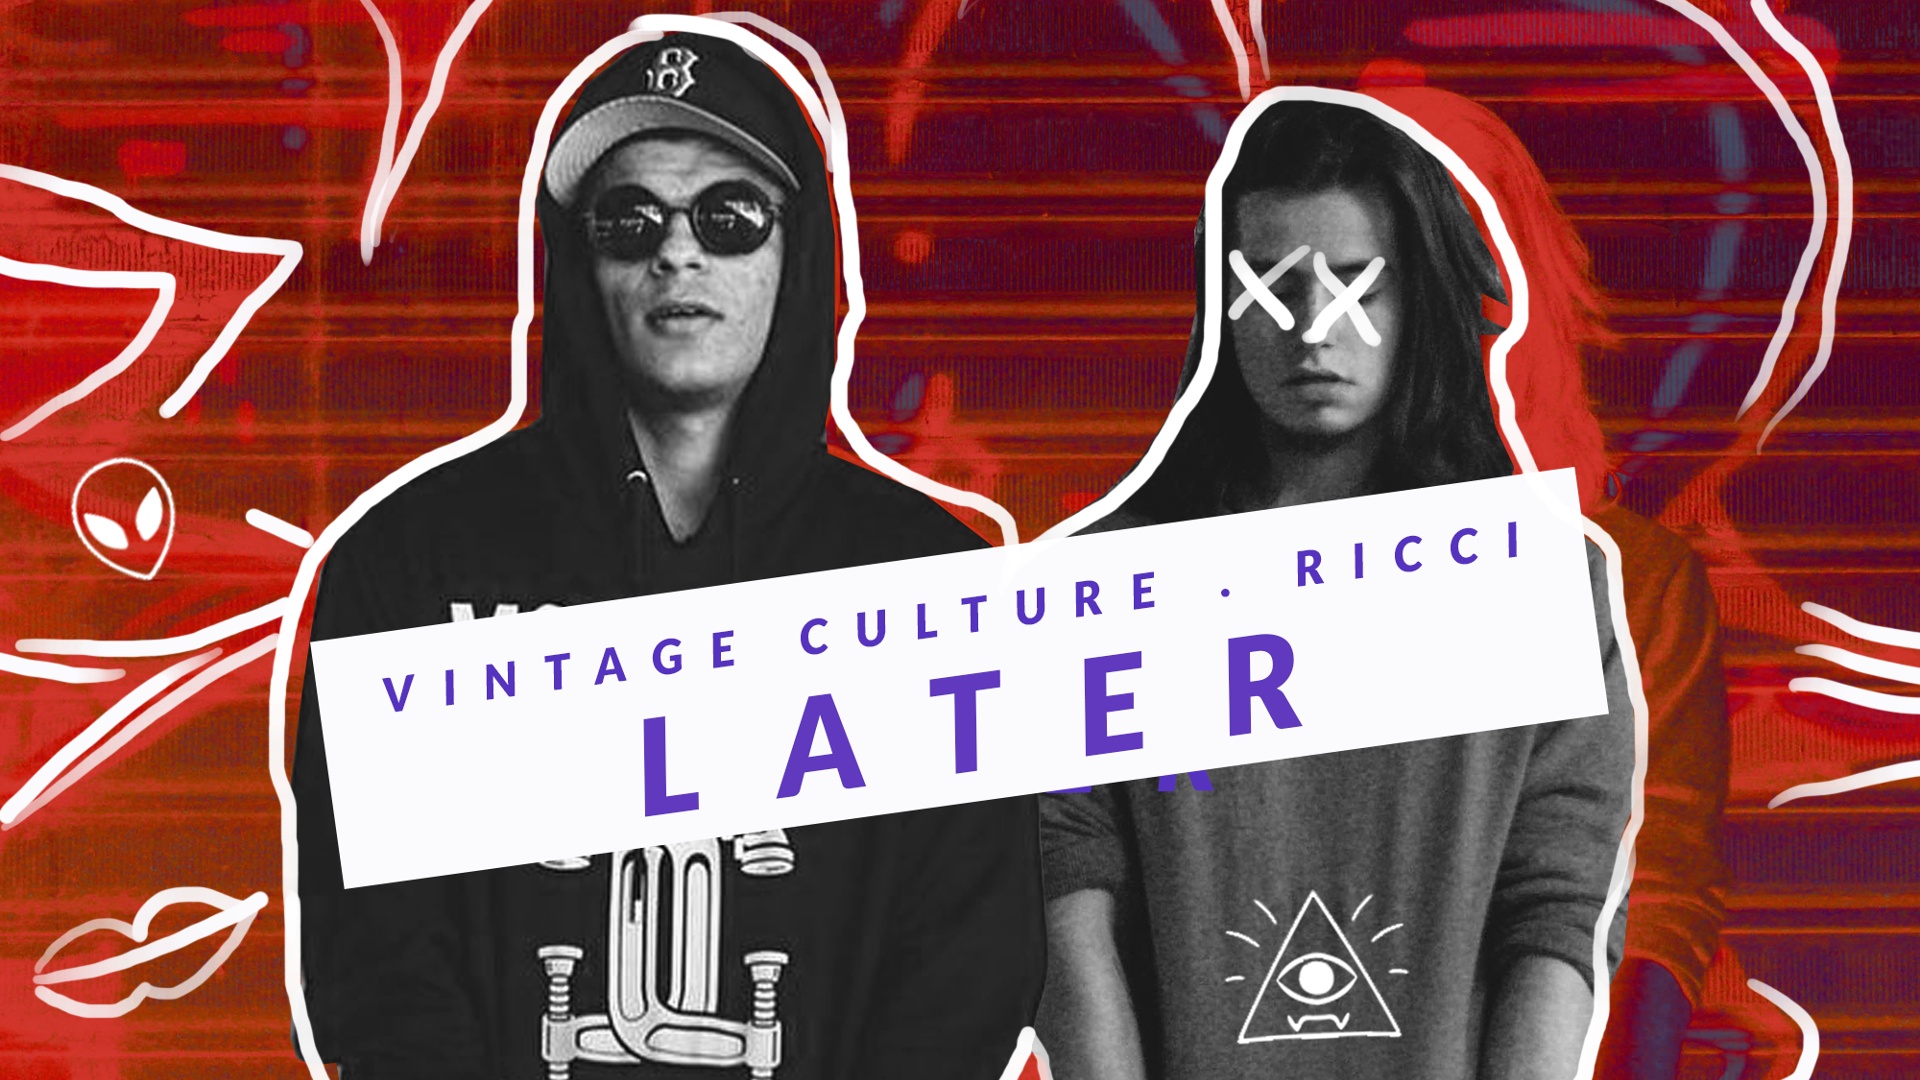 Vintage Culture & Ricci Later - Poster , HD Wallpaper & Backgrounds